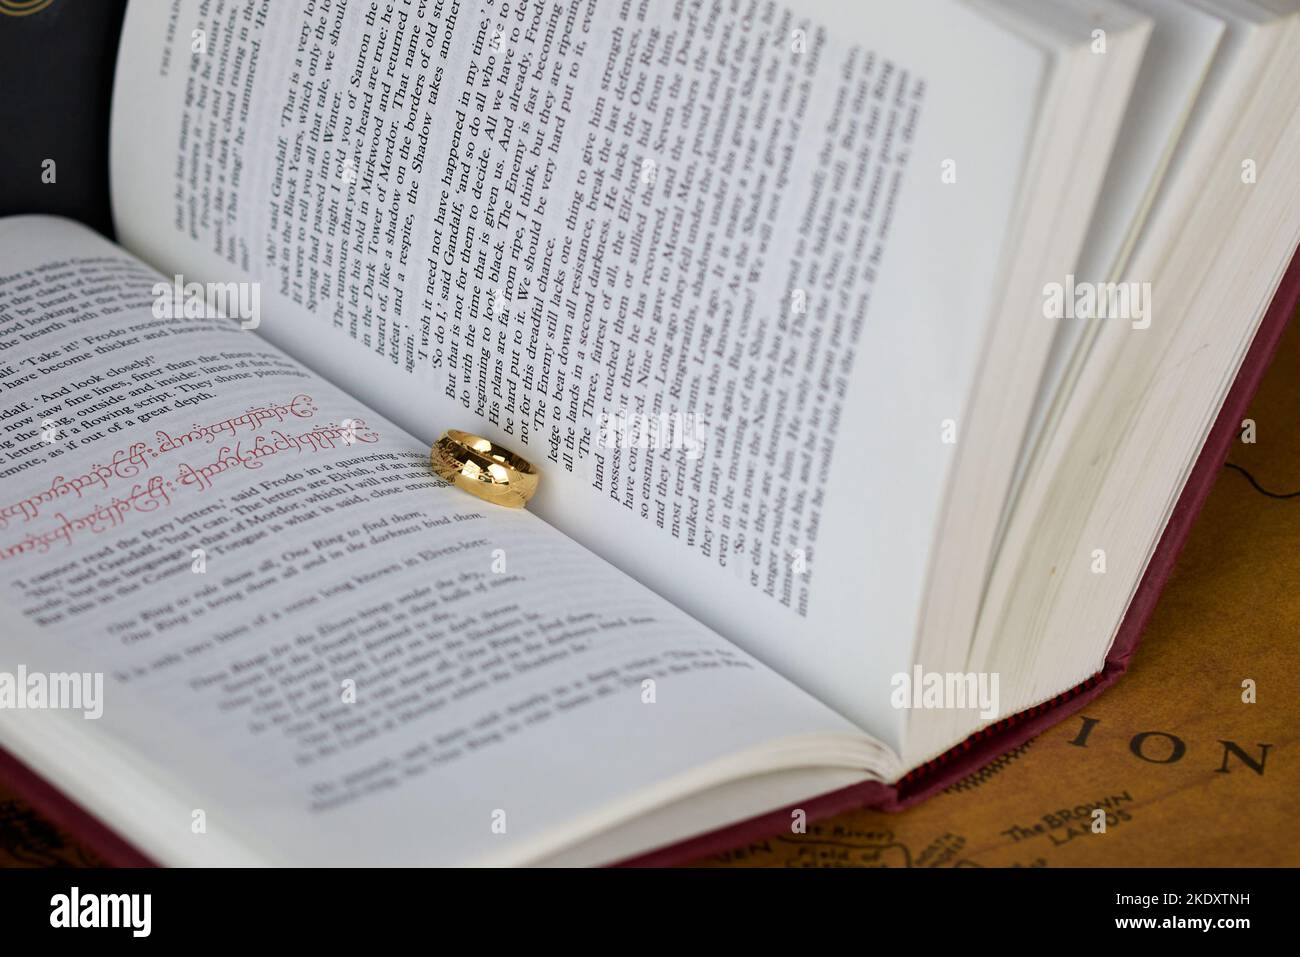 Astrakhan, Russia - 11.09.2022: Golden Ring of Power lies between the pages of the The Lord of the Rings book Stock Photo